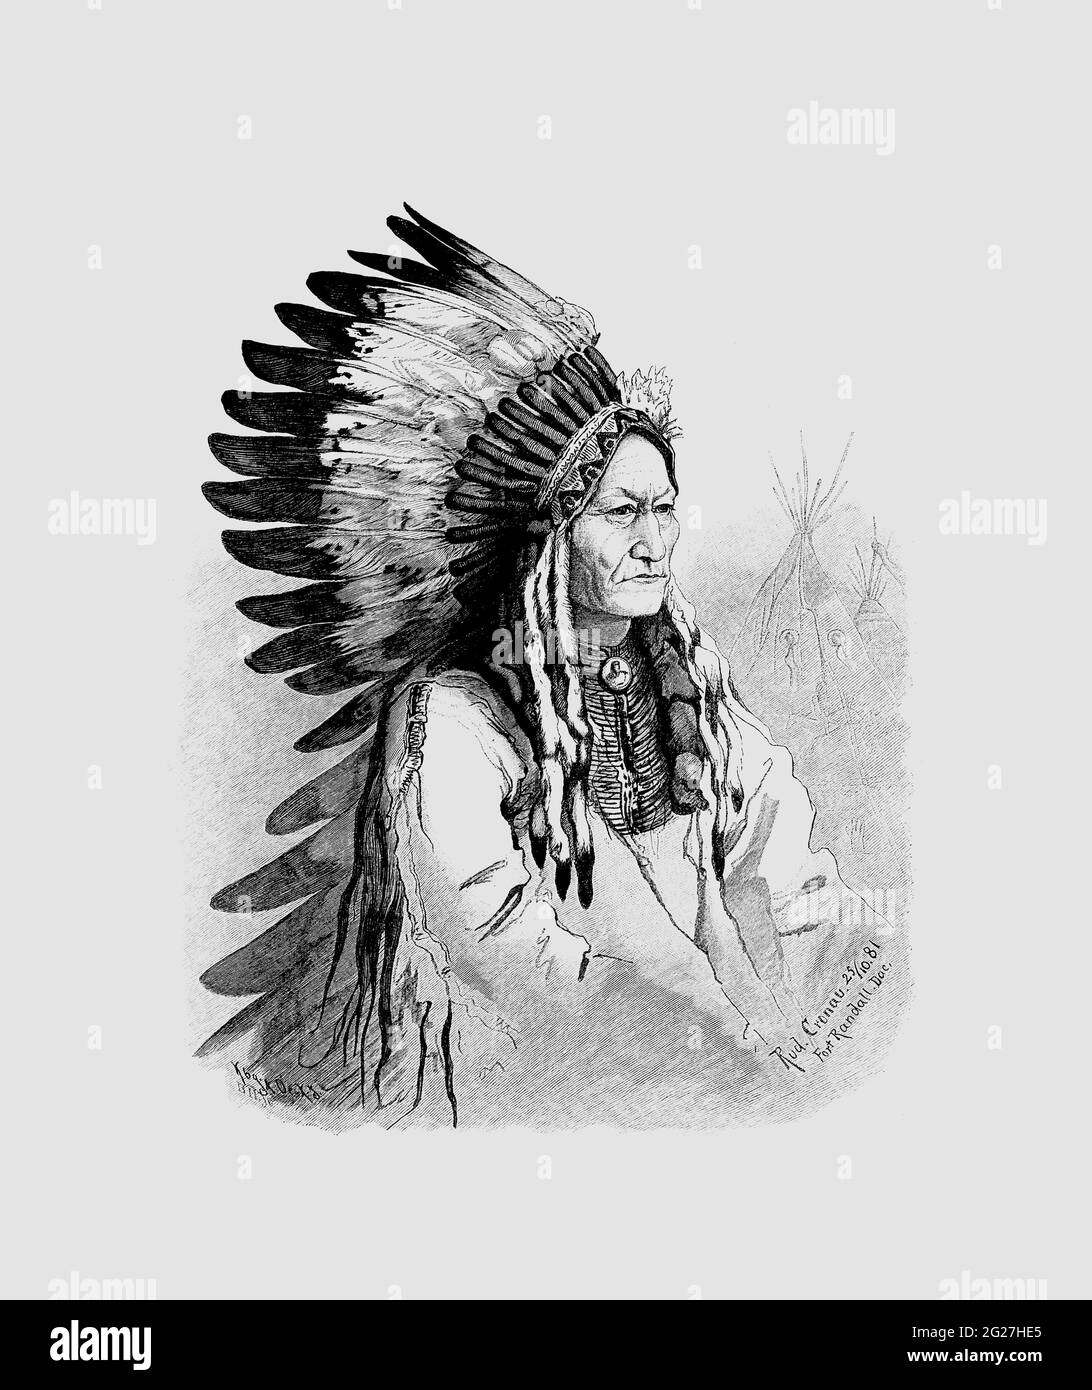 An illustration of the Native Indian Chief, Sitting Bull. Stock Photo